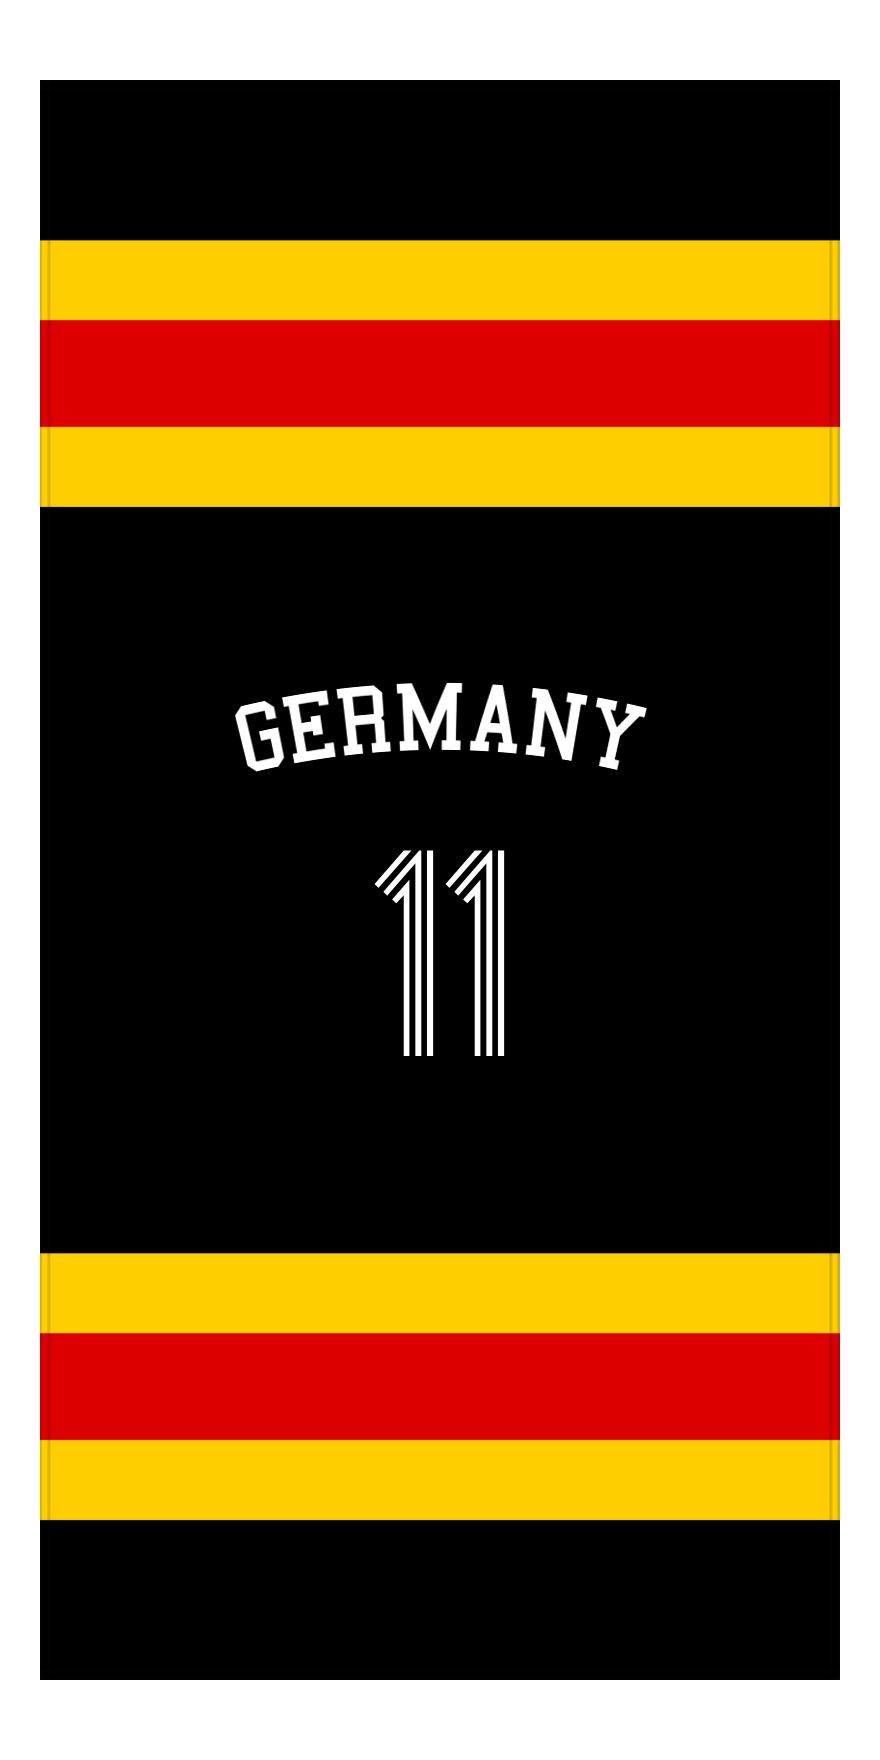 Personalized Jersey Number 1-on-1 Stripes Sports Beach Towel with Arched Name - Germany - Vertical Design - Front View